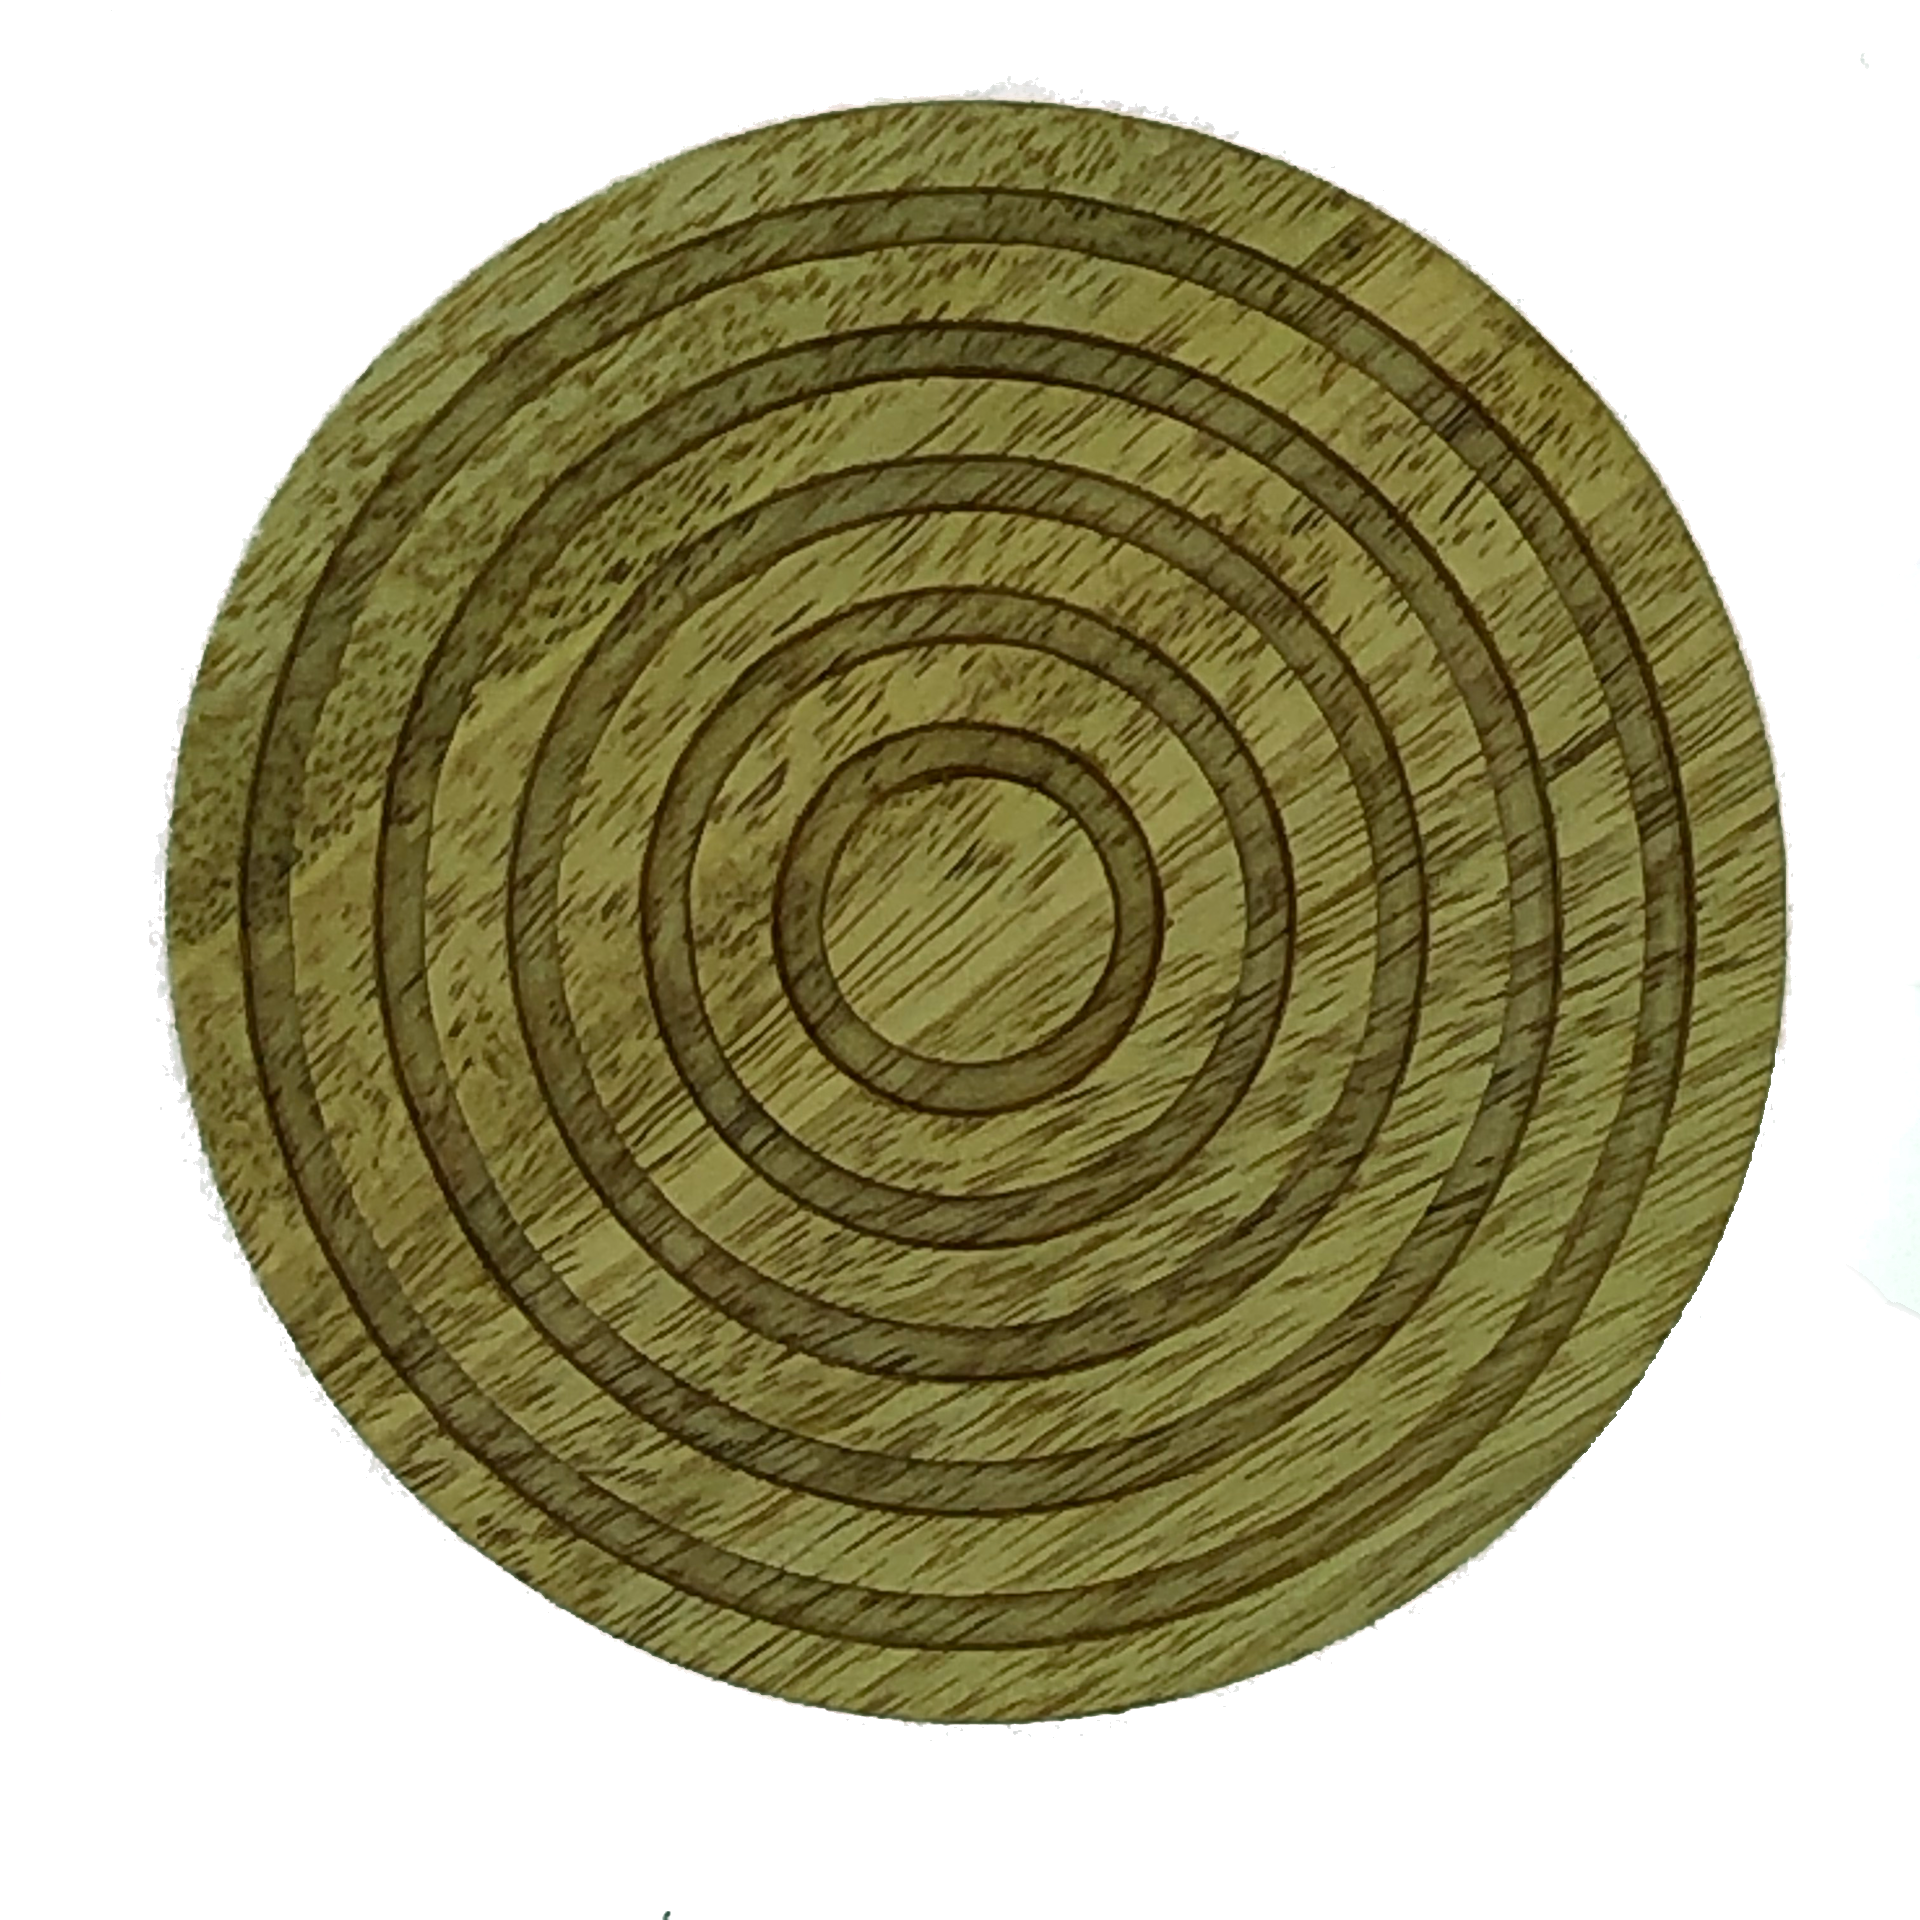 Solid idigbo wooden coasters - carved with concentric circles